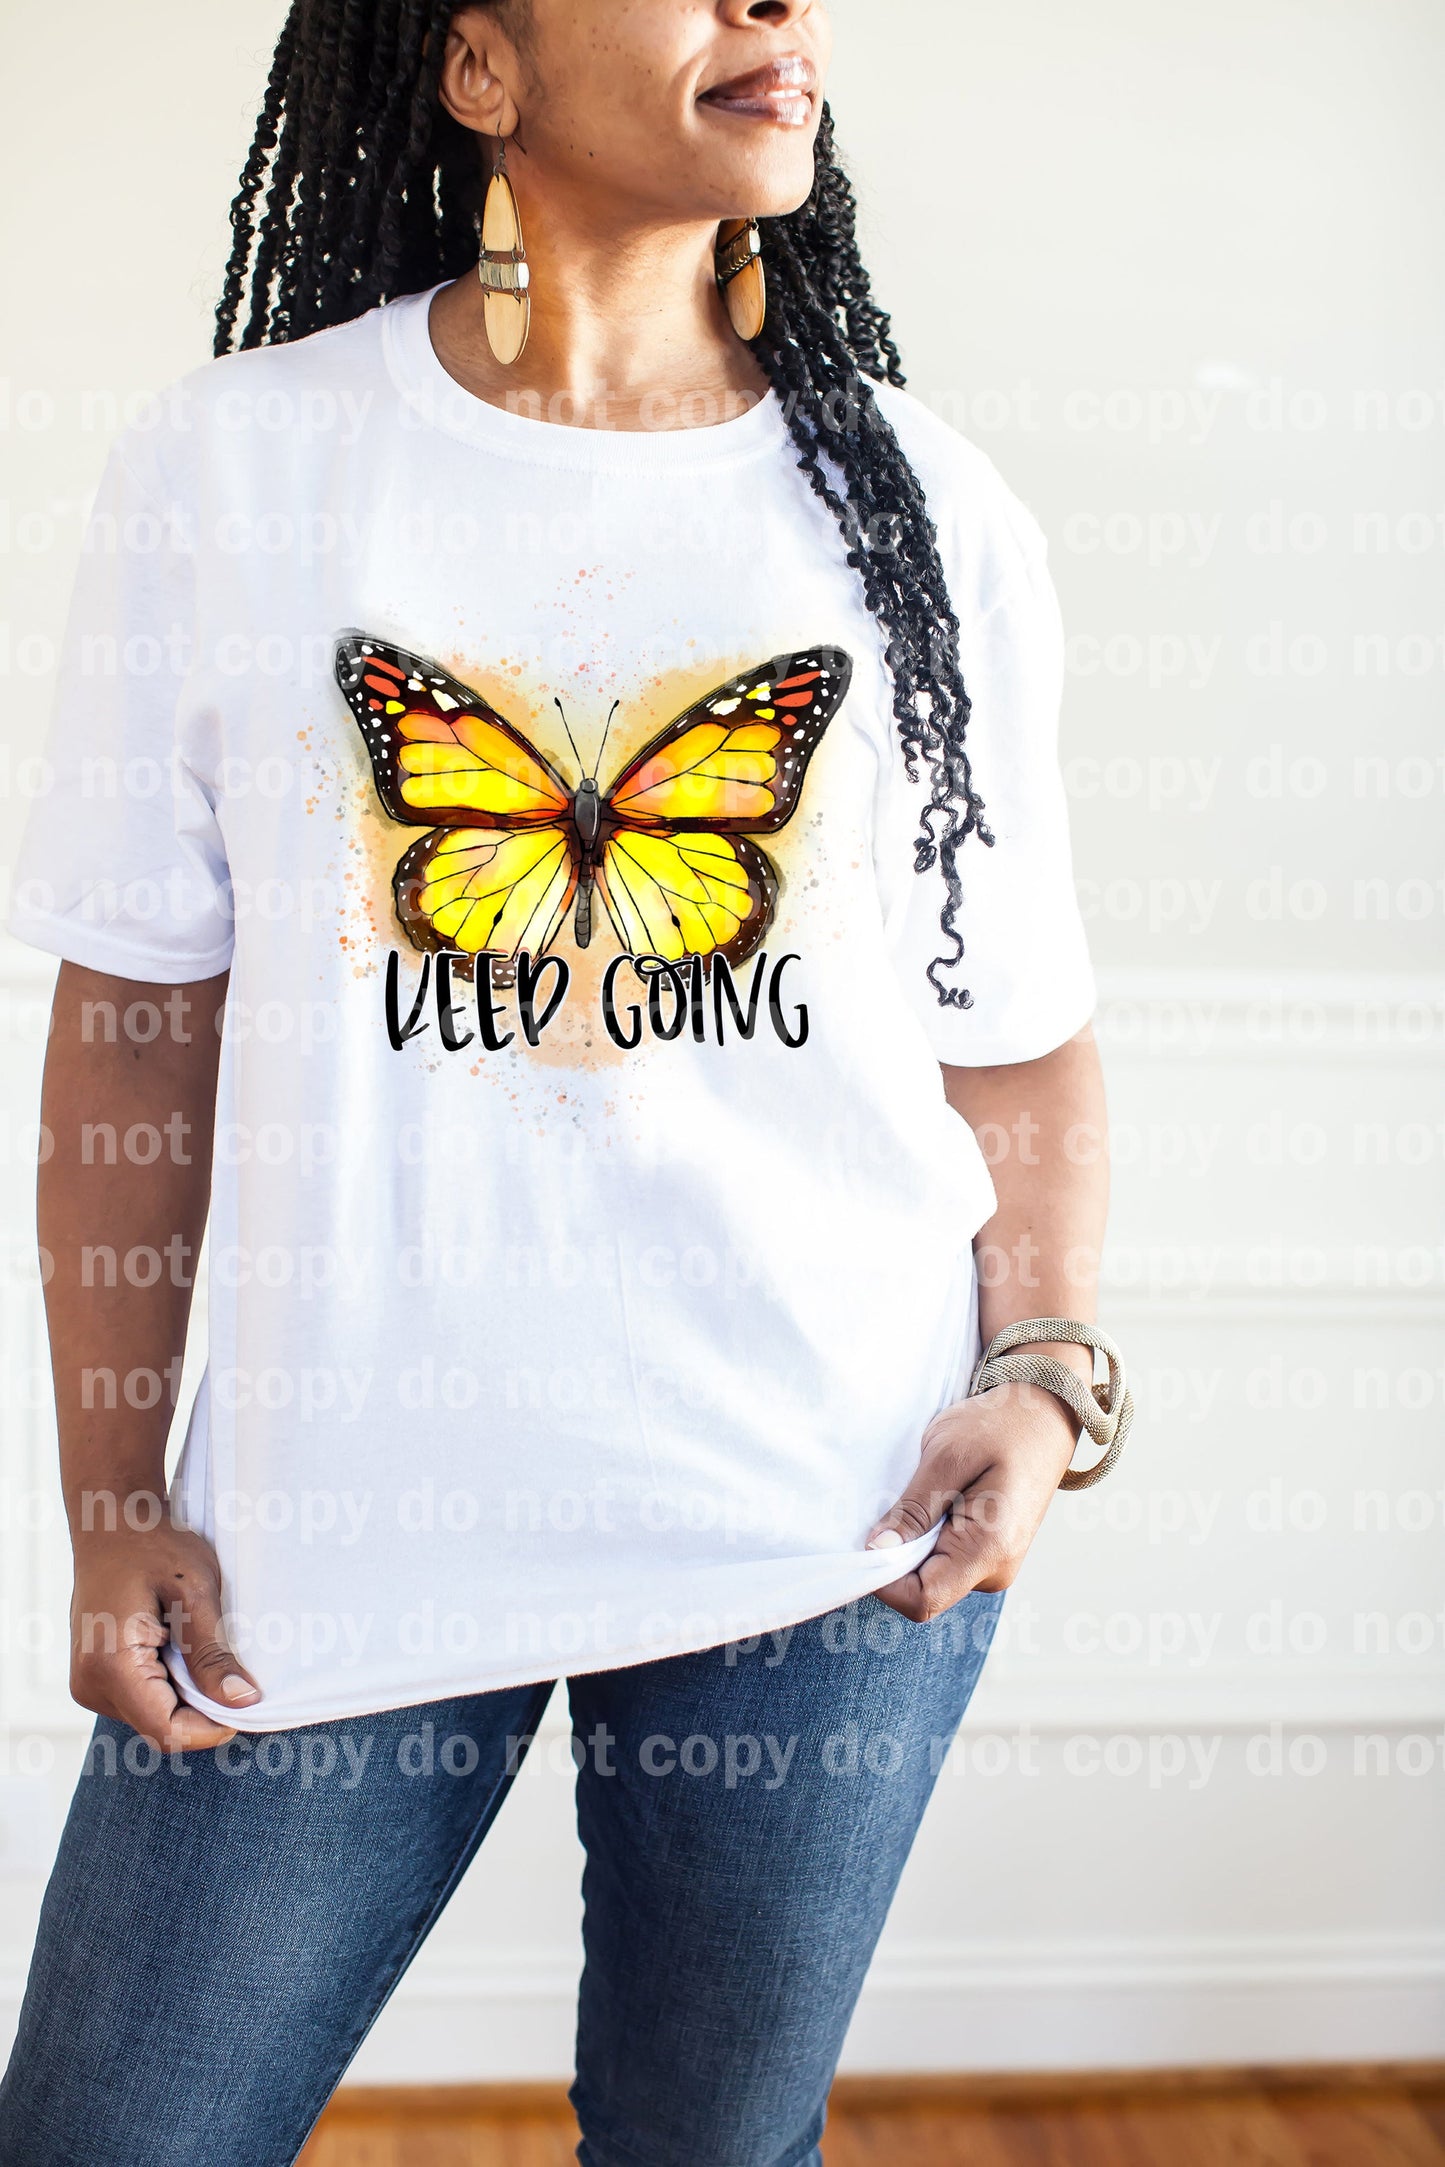 Keep Going Dream Print or Sublimation Print